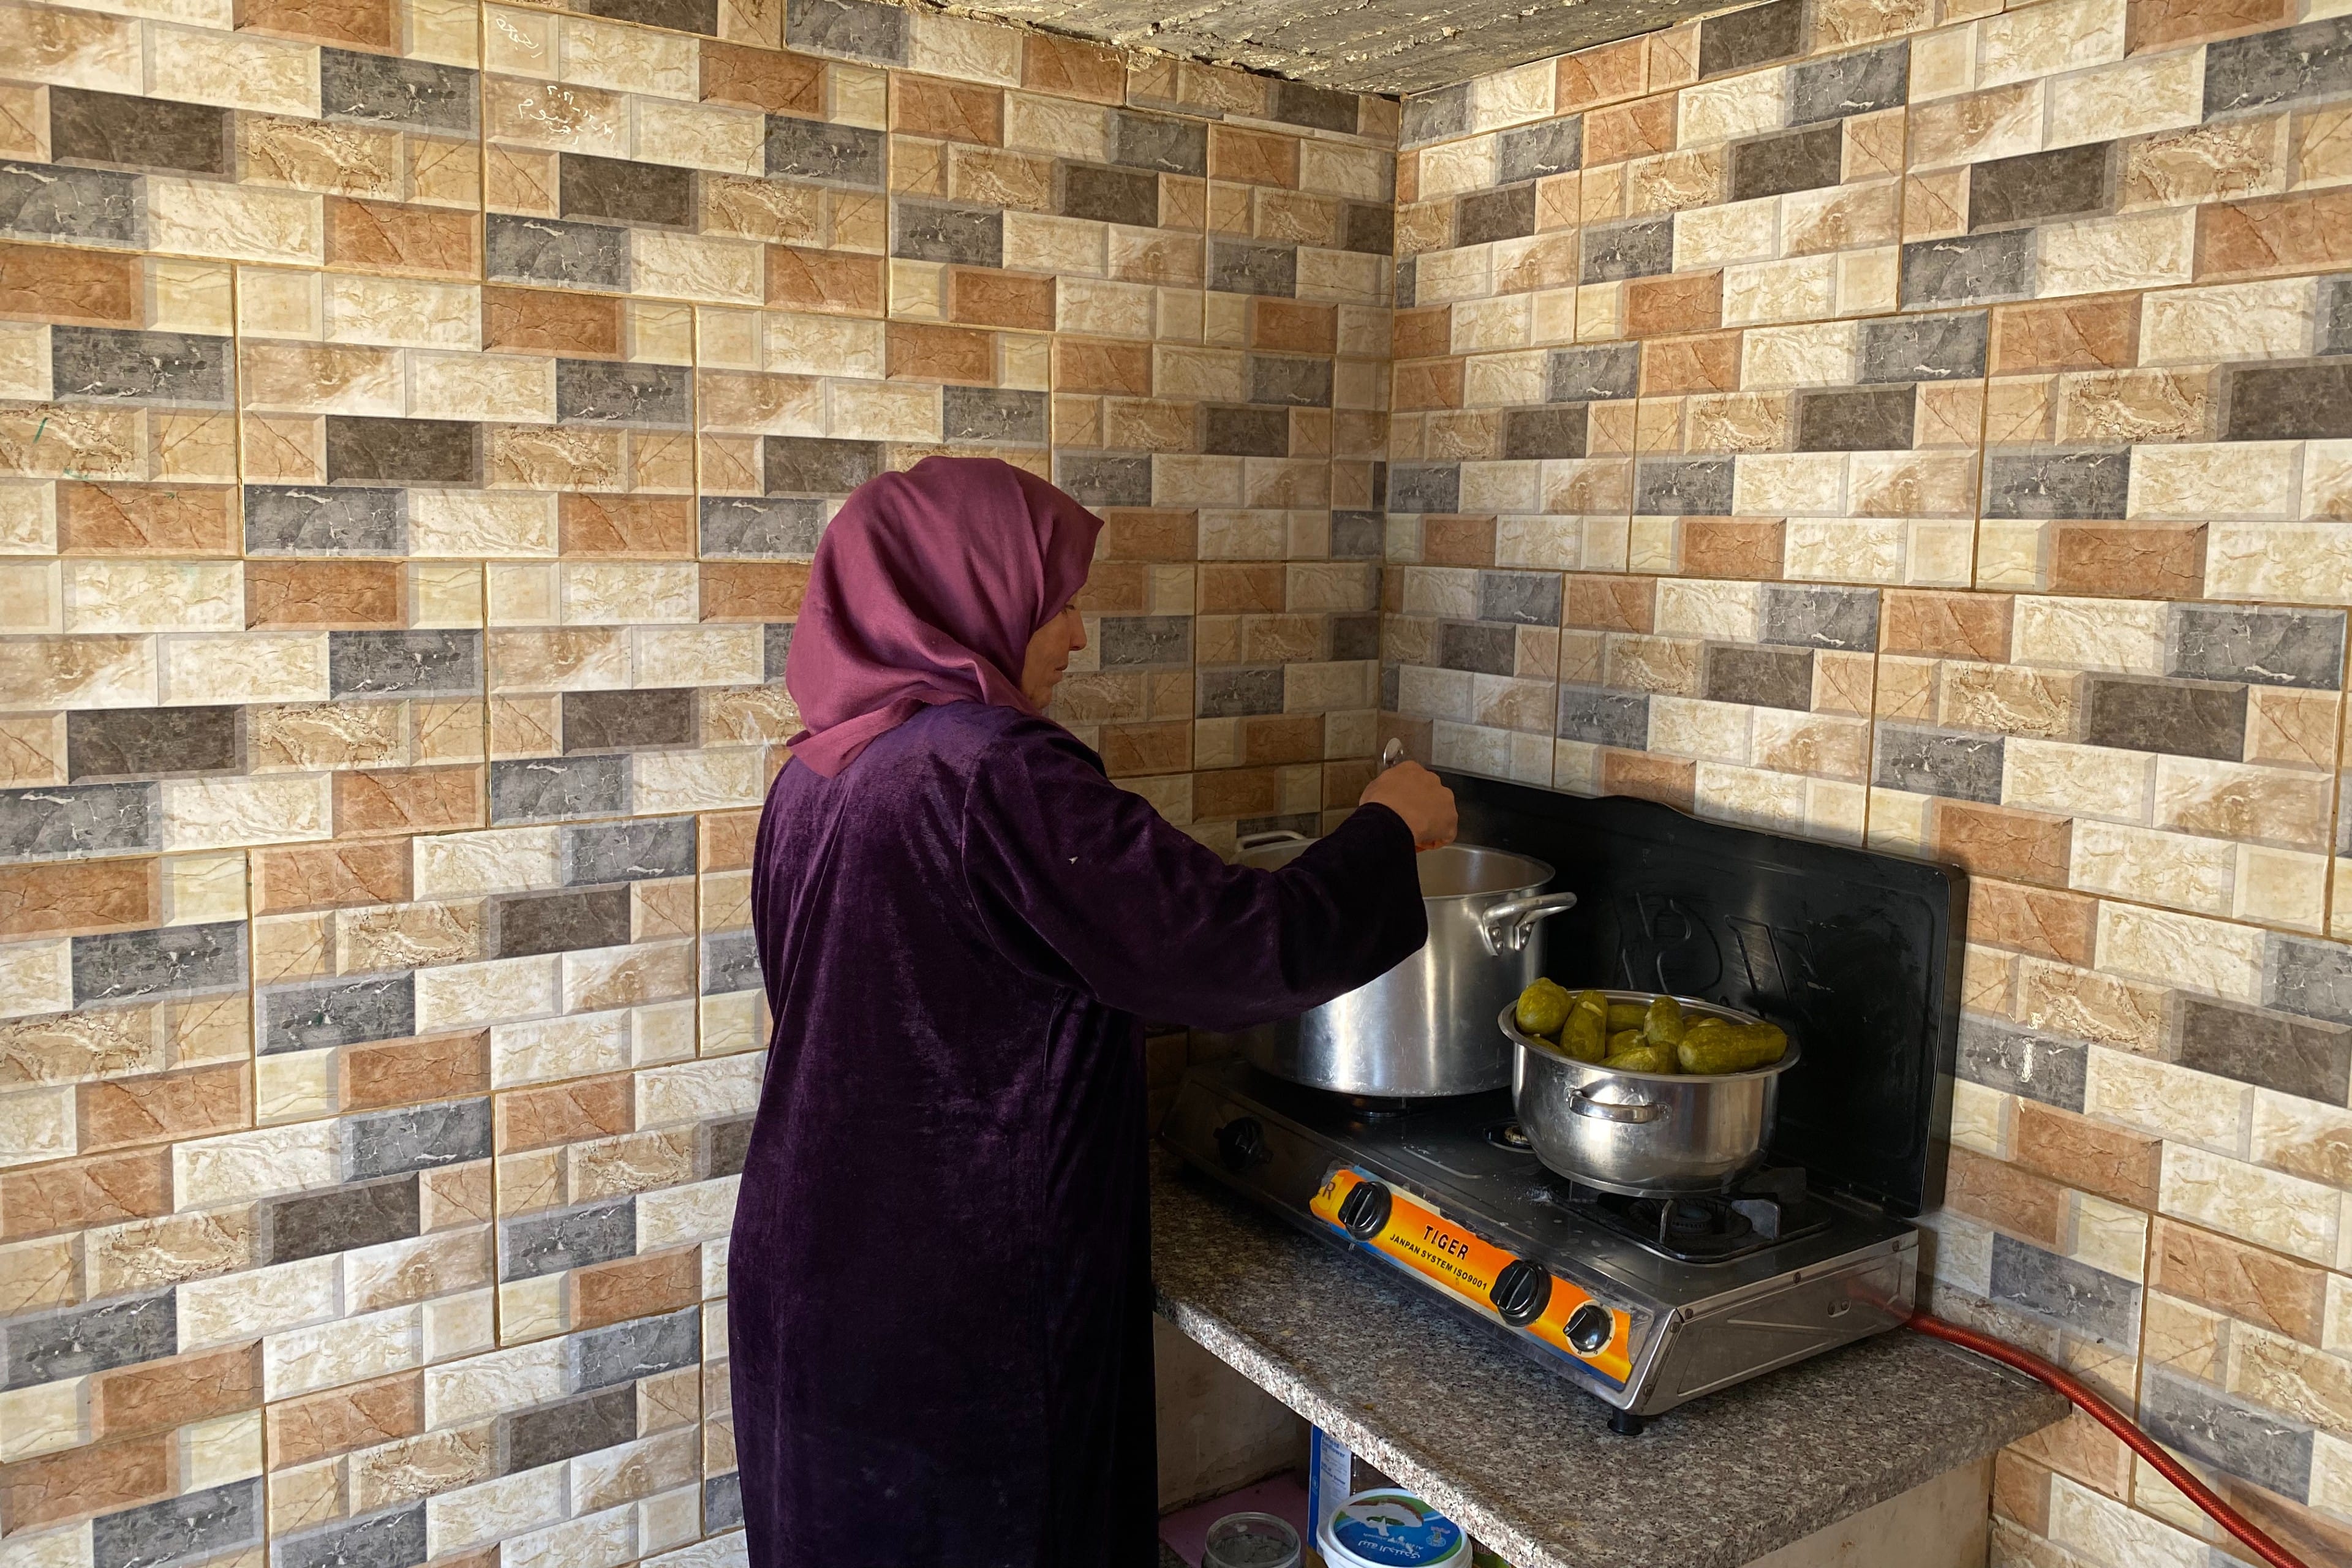 Laila Mo'nes preparing lunch for her children in the Israeli-occupied West Bank hamlets of Masafer Yatta on 19 June 2022. (MEE/Shatha Hammad)